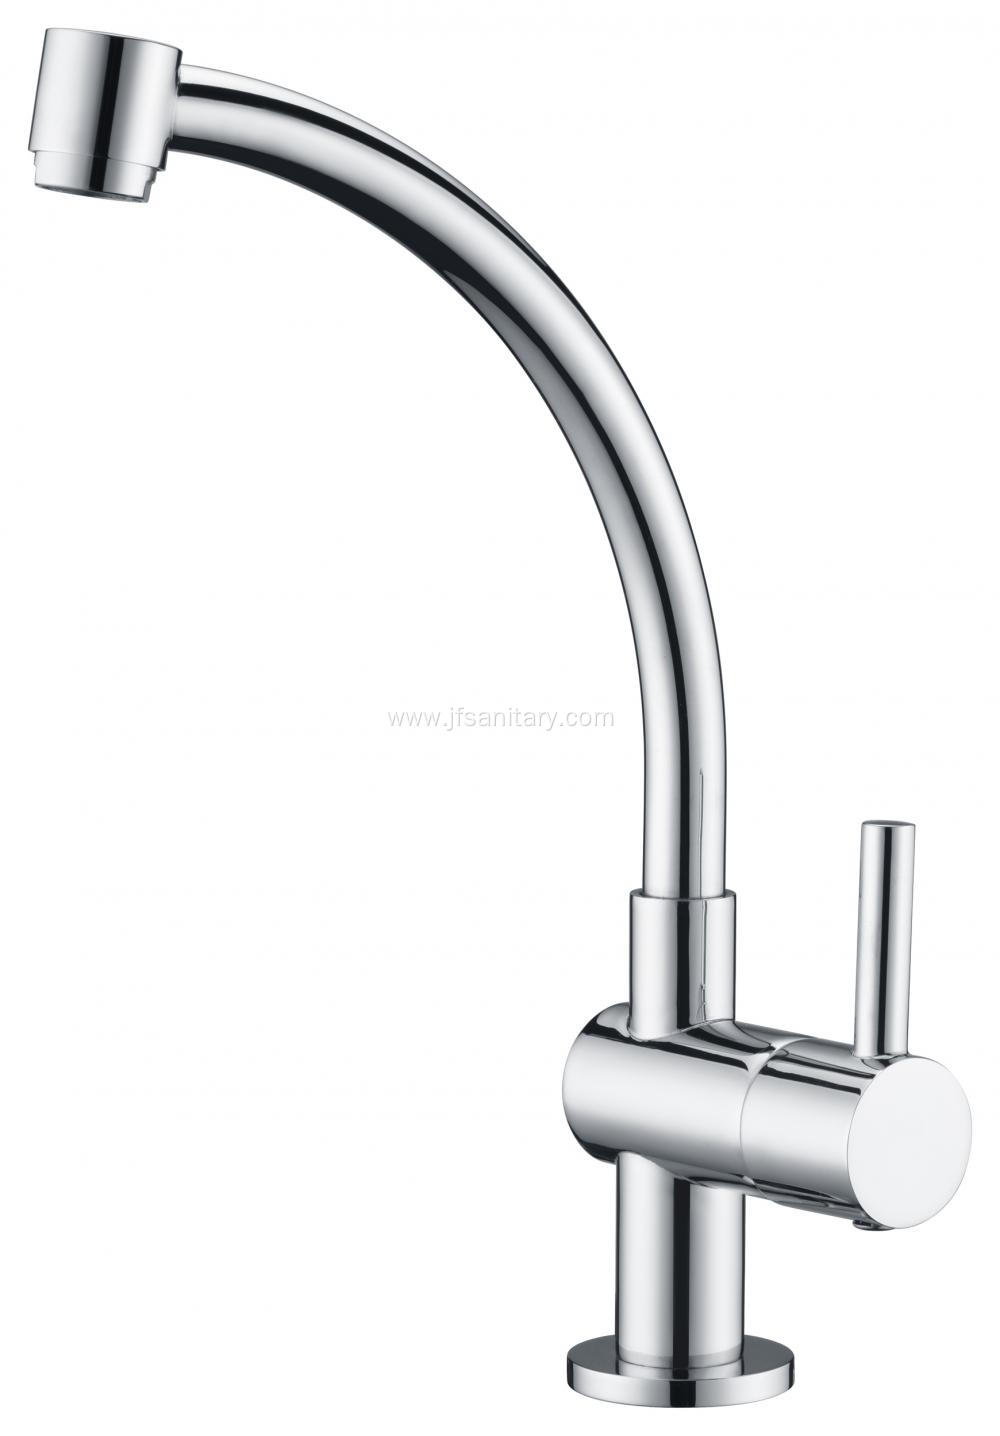 Gooseneck Sink Mixer Cold Water Only For Kitchen